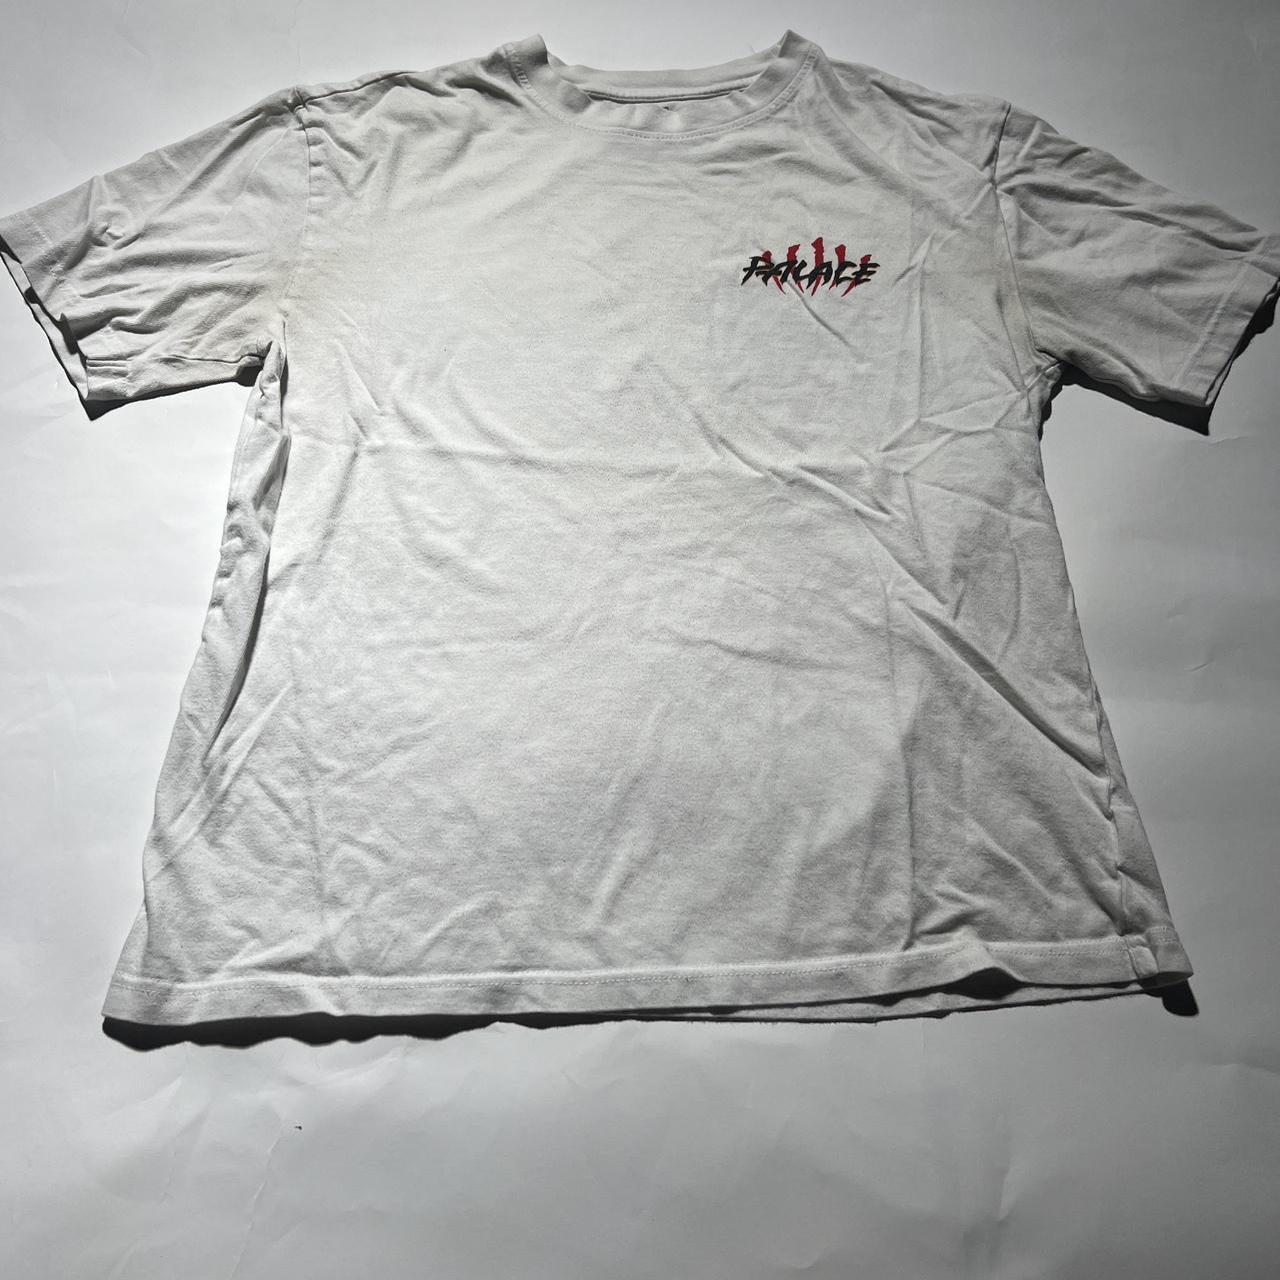 Palace Men's White and Red T-shirt - 2